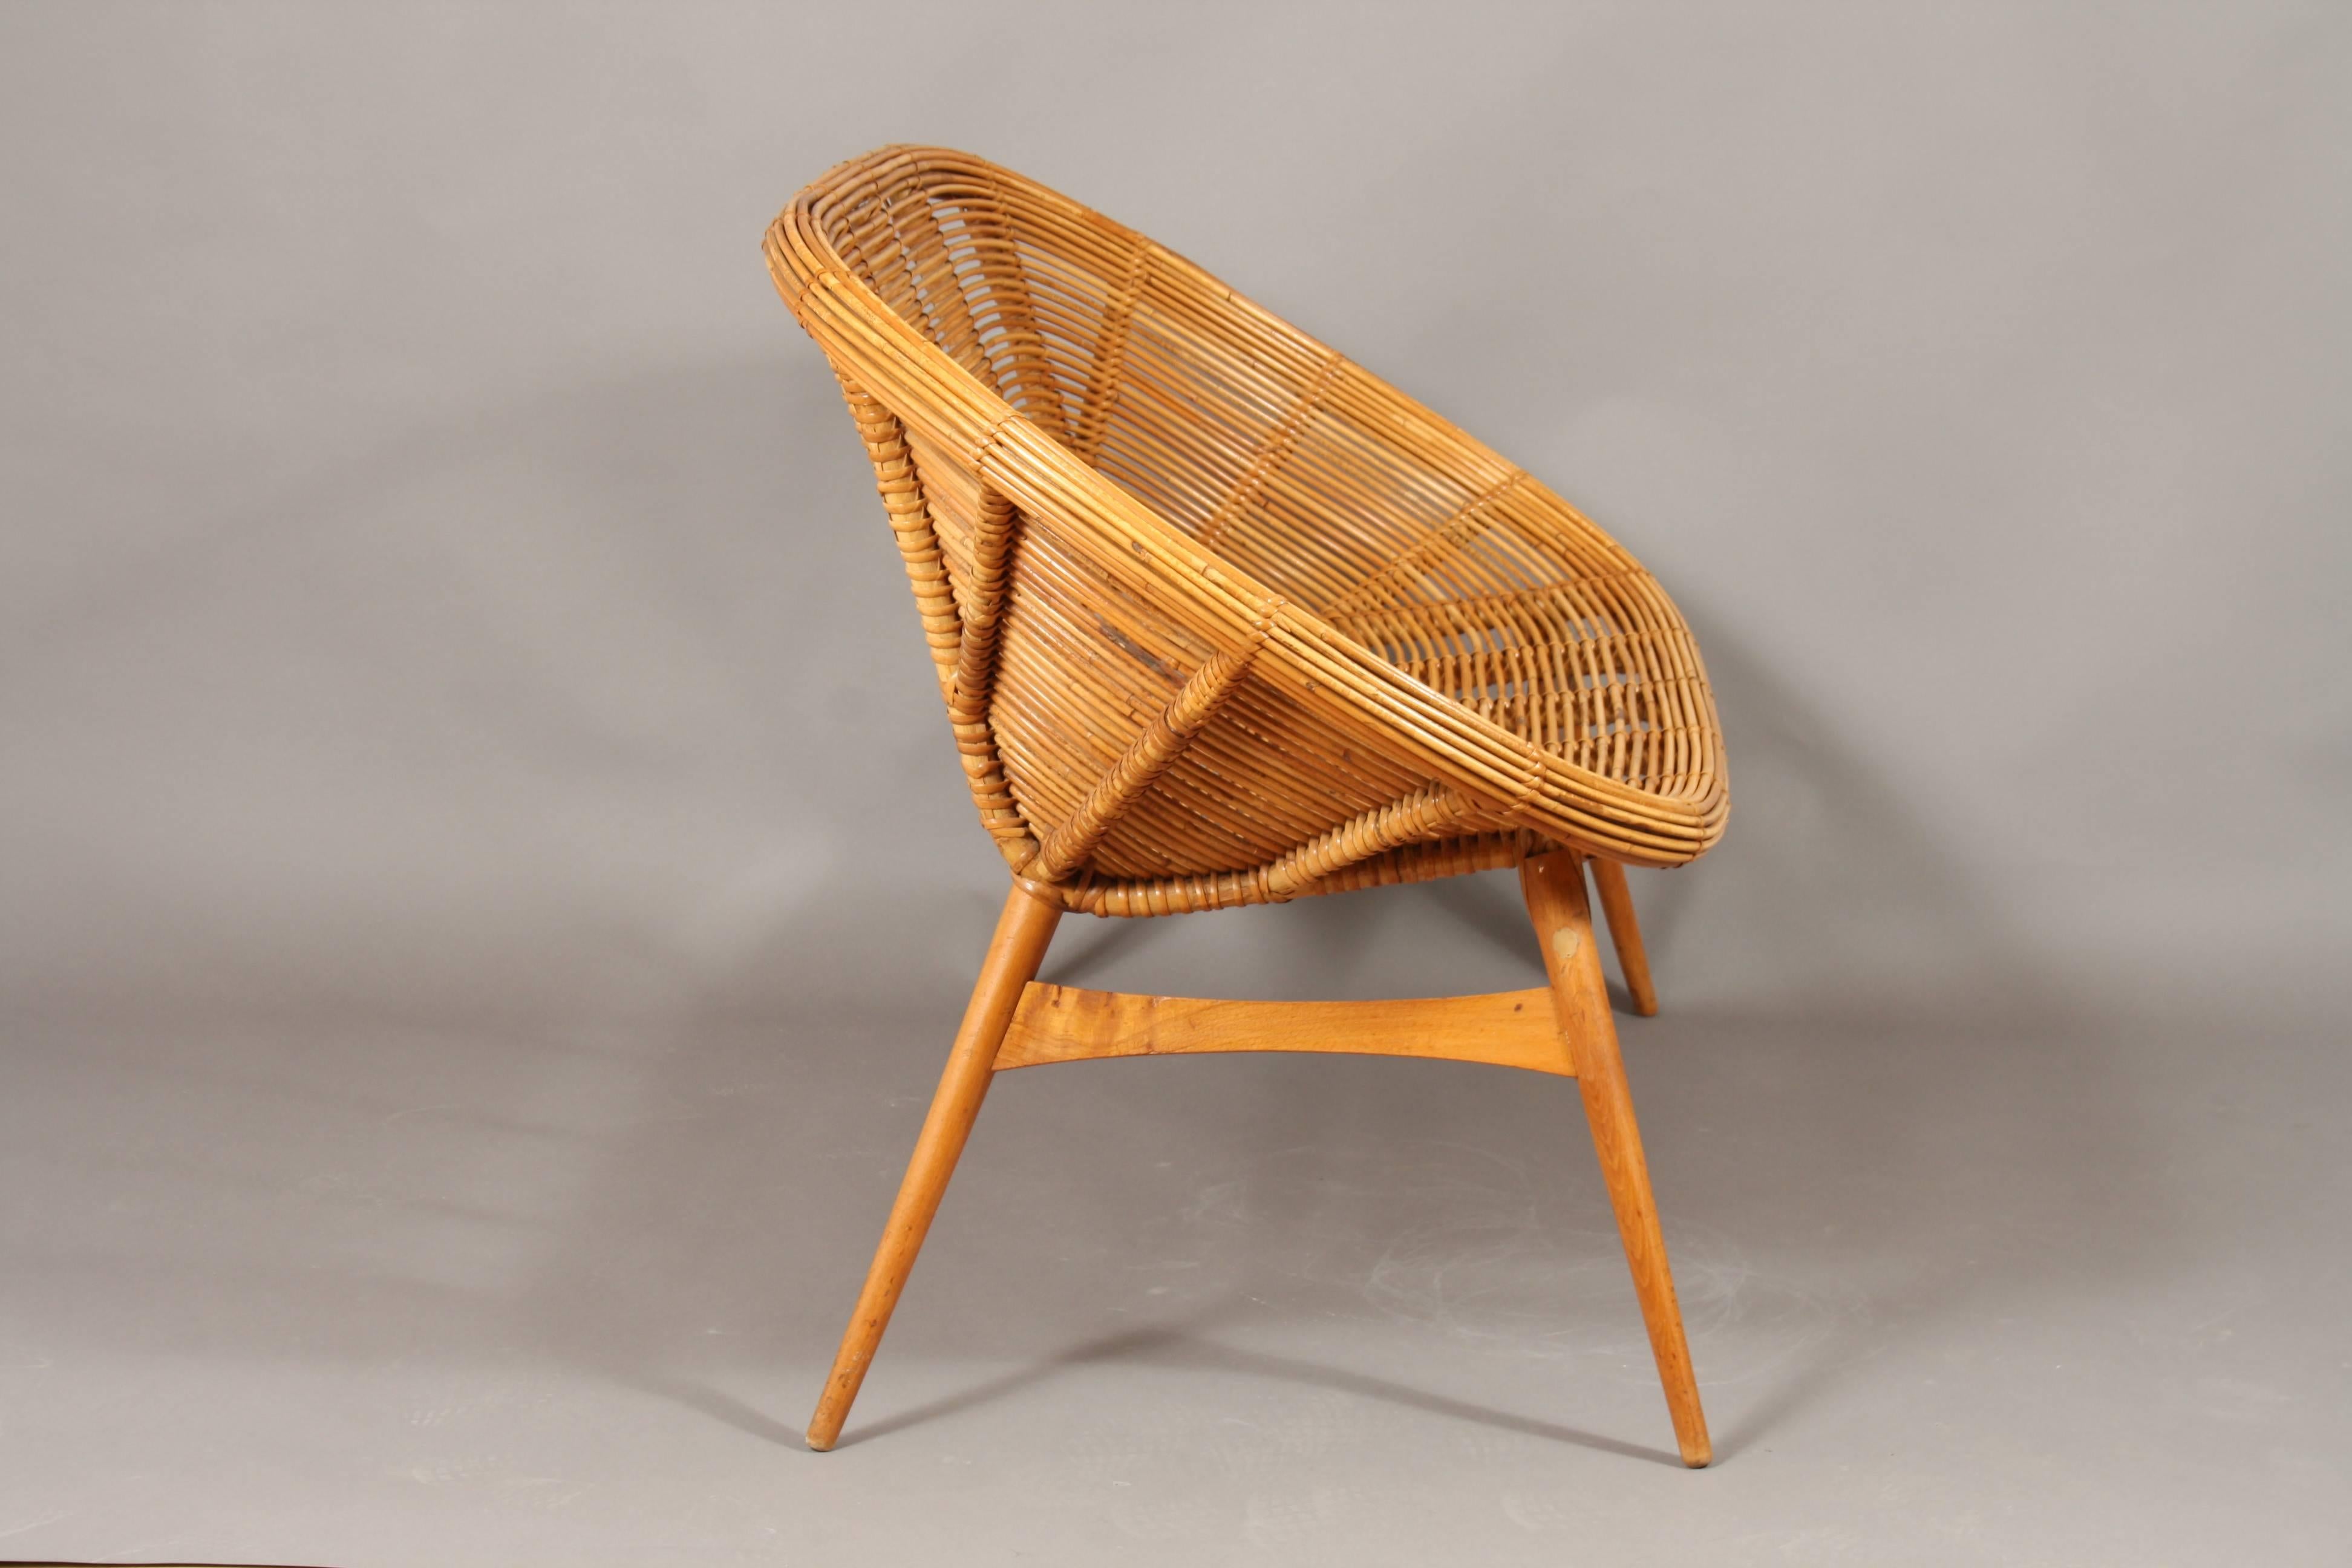 1960s Wicker Sofa with Teak Frame, Design from DDR 2